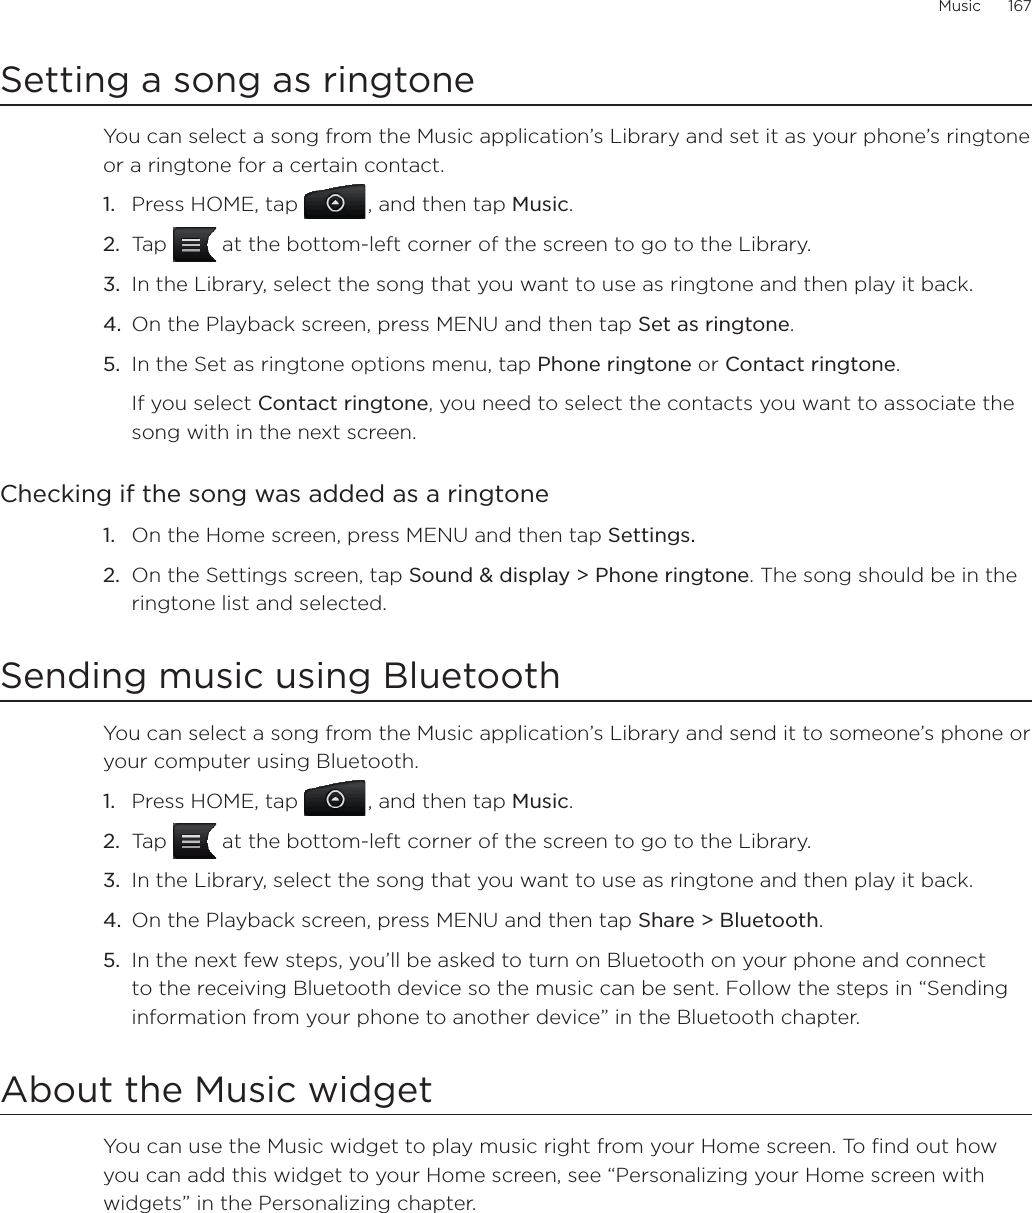 Music      167Setting a song as ringtoneYou can select a song from the Music application’s Library and set it as your phone’s ringtone or a ringtone for a certain contact.Press HOME, tap , and then tap Music.Tap   at the bottom-left corner of the screen to go to the Library.In the Library, select the song that you want to use as ringtone and then play it back.On the Playback screen, press MENU and then tap Set as ringtone.In the Set as ringtone options menu, tap Phone ringtone or Contact ringtone.If you select Contact ringtone, you need to select the contacts you want to associate the song with in the next screen.Checking if the song was added as a ringtoneOn the Home screen, press MENU and then tap Settings.On the Settings screen, tap Sound &amp; display &gt; Phone ringtone. The song should be in the ringtone list and selected. Sending music using BluetoothYou can select a song from the Music application’s Library and send it to someone’s phone or your computer using Bluetooth.Press HOME, tap , and then tap Music.Tap   at the bottom-left corner of the screen to go to the Library.In the Library, select the song that you want to use as ringtone and then play it back.On the Playback screen, press MENU and then tap Share &gt; Bluetooth.In the next few steps, you’ll be asked to turn on Bluetooth on your phone and connect to the receiving Bluetooth device so the music can be sent. Follow the steps in “Sending information from your phone to another device” in the Bluetooth chapter.About the Music widgetYou can use the Music widget to play music right from your Home screen. To find out how you can add this widget to your Home screen, see “Personalizing your Home screen with widgets” in the Personalizing chapter.1.2.3.4.5.1.2.1.2.3.4.5.